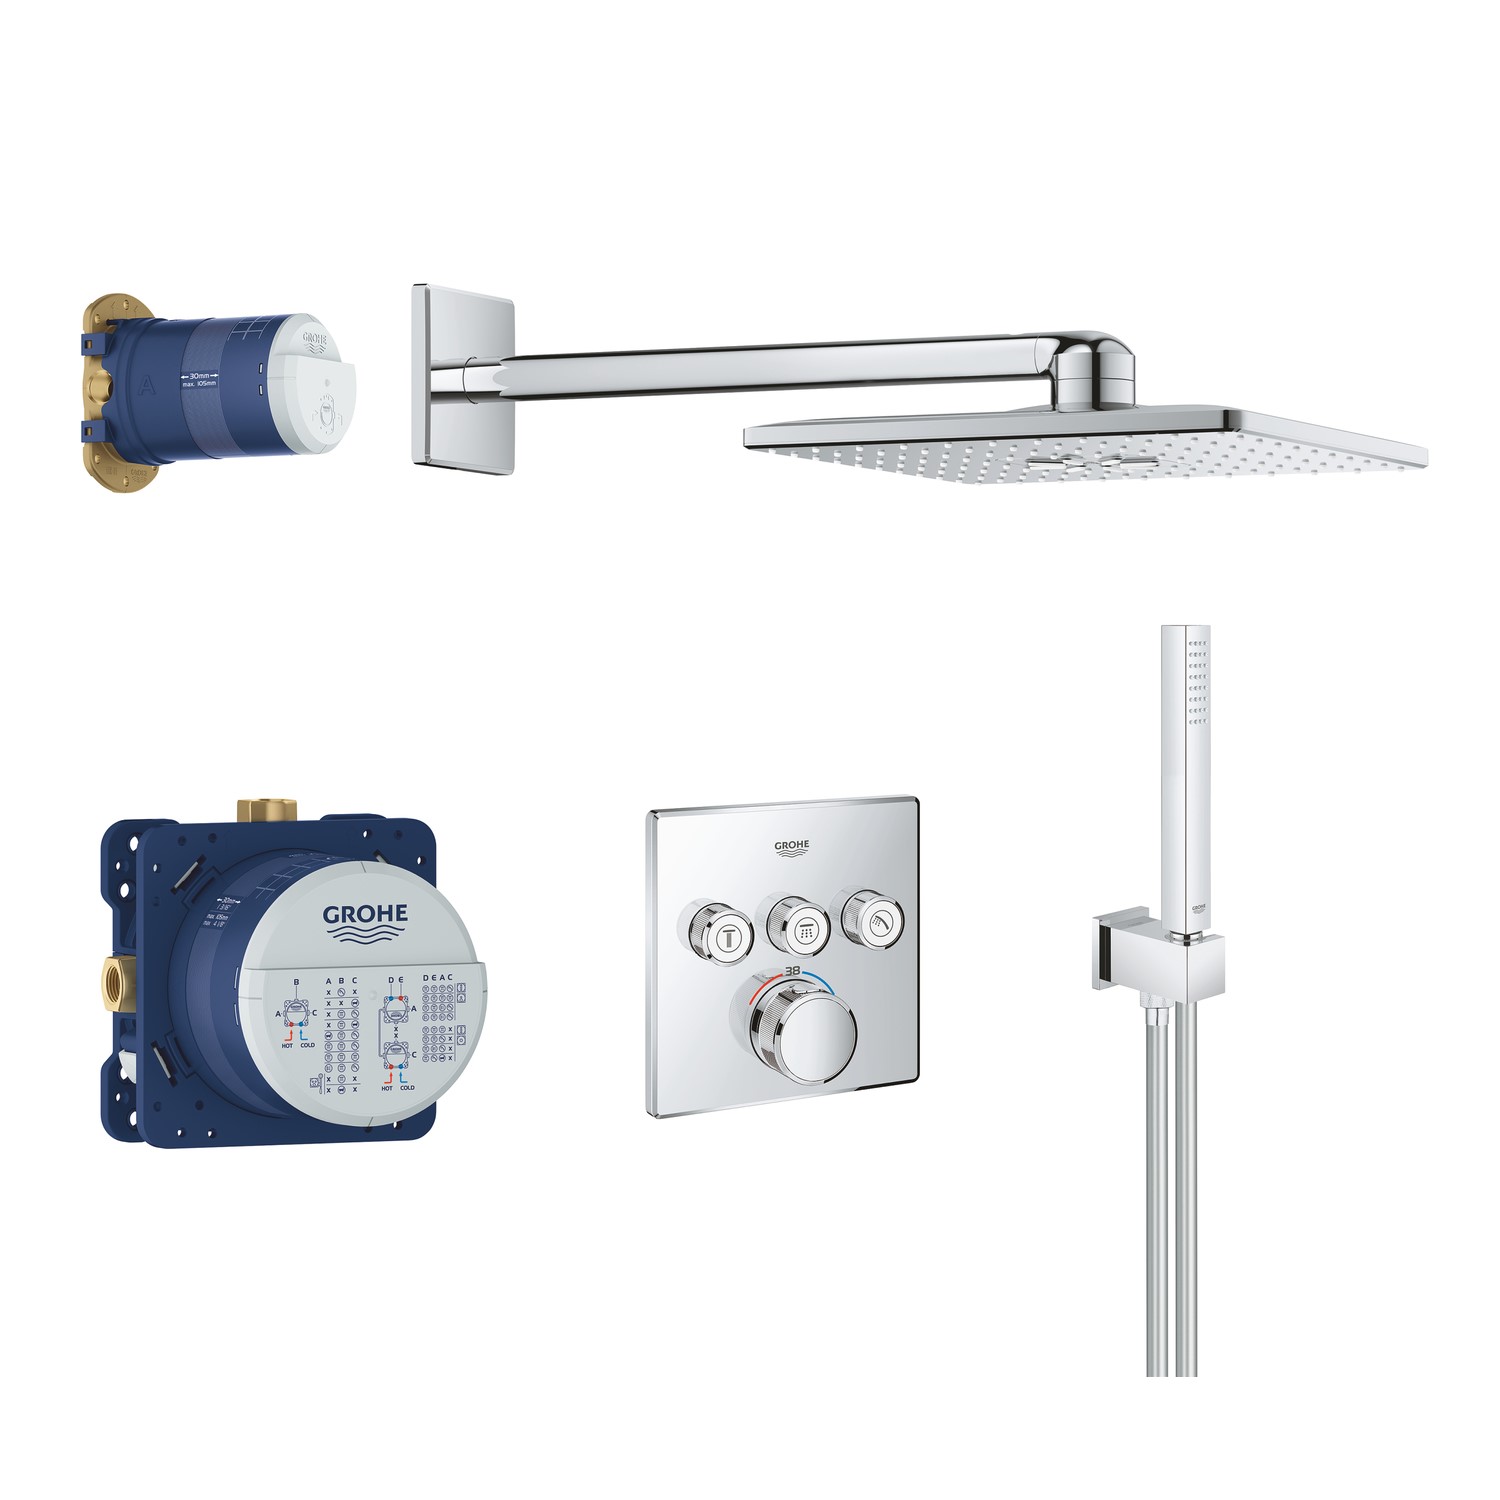 Grohe Grohtherm Concealed Thermostatic Mixer Shower with Square Wall Mounted Shower Head & Pencil Ha